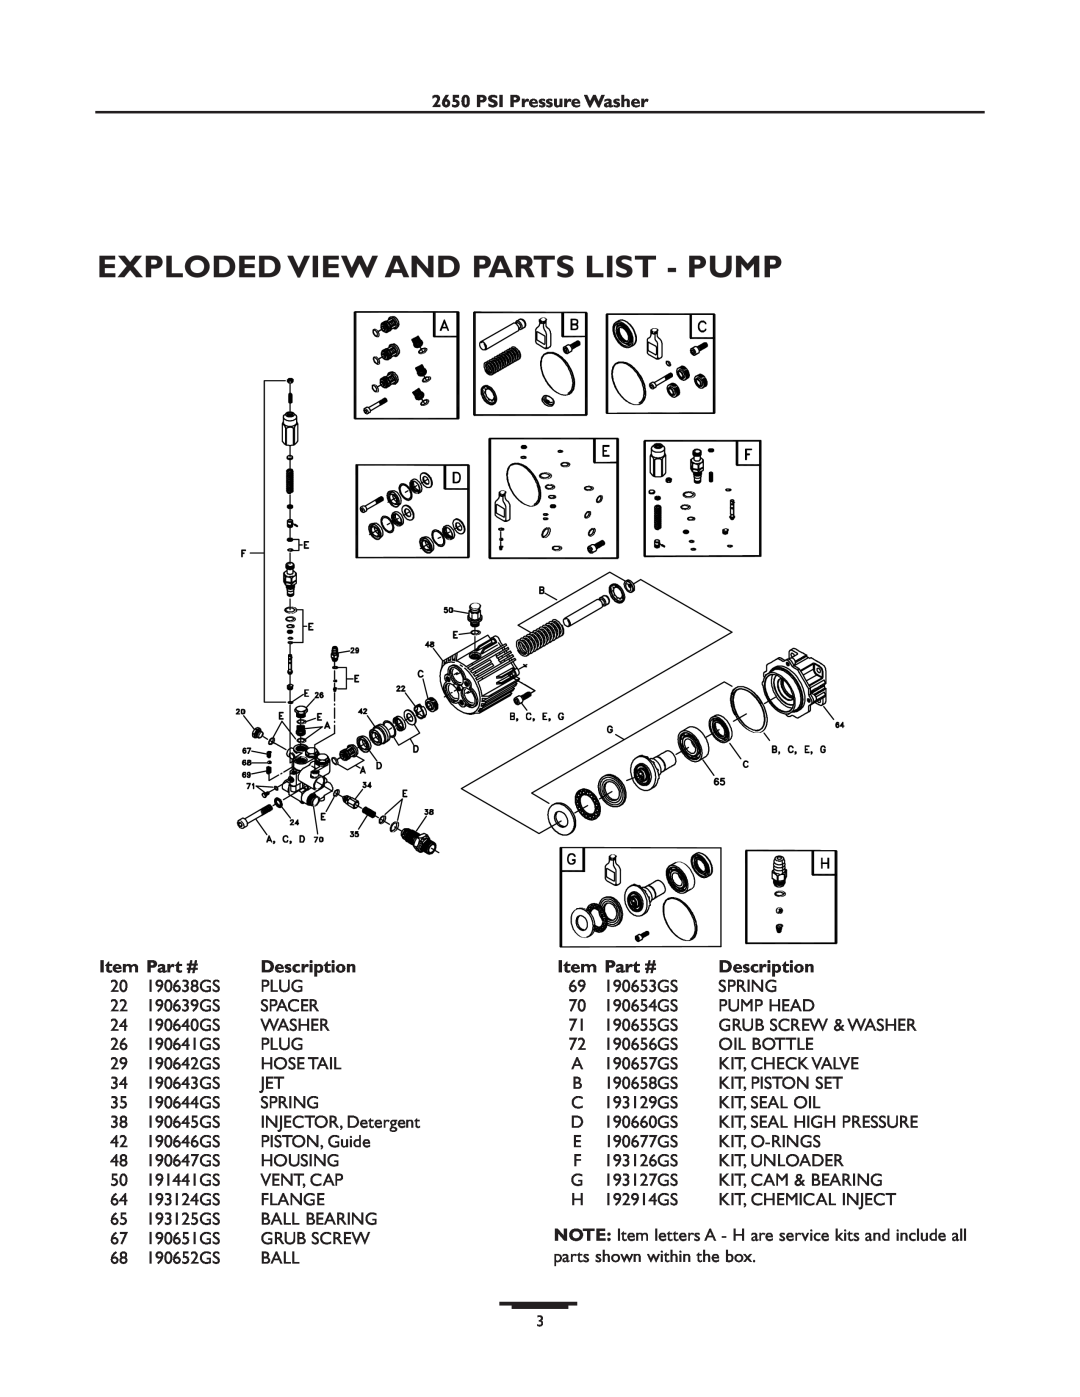 Briggs & Stratton 01806, 01805 owner manual Exploded View And Parts List - Pump, PSI Pressure Washer, Description 